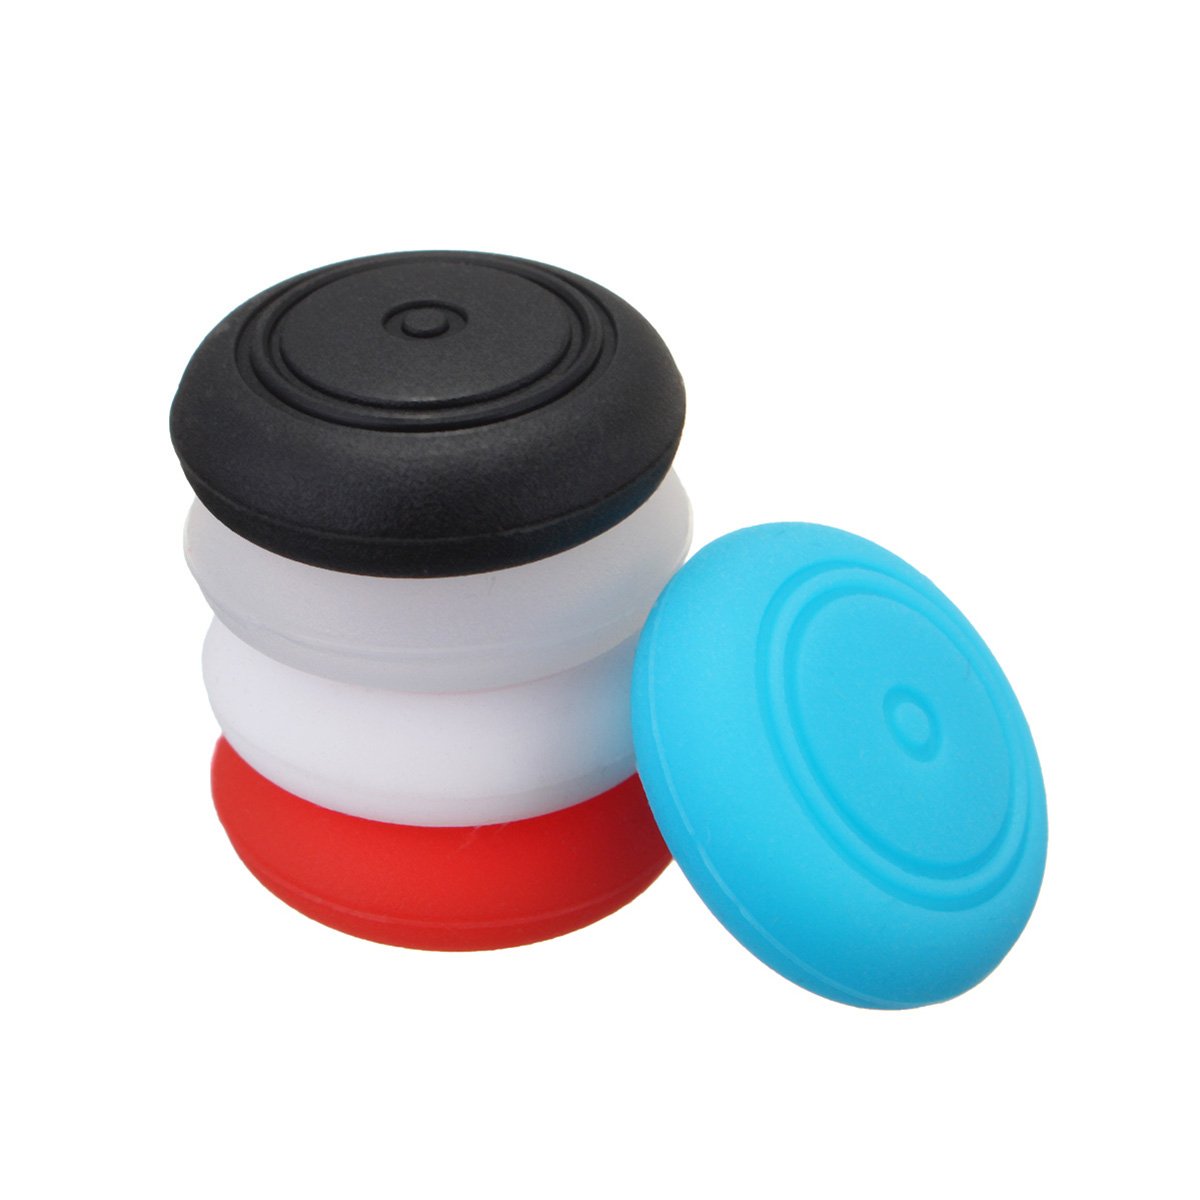 Silicone Replacement Thumb Grip Stick Cap Cover Skin For Nintendo Switch Joy-Con 2